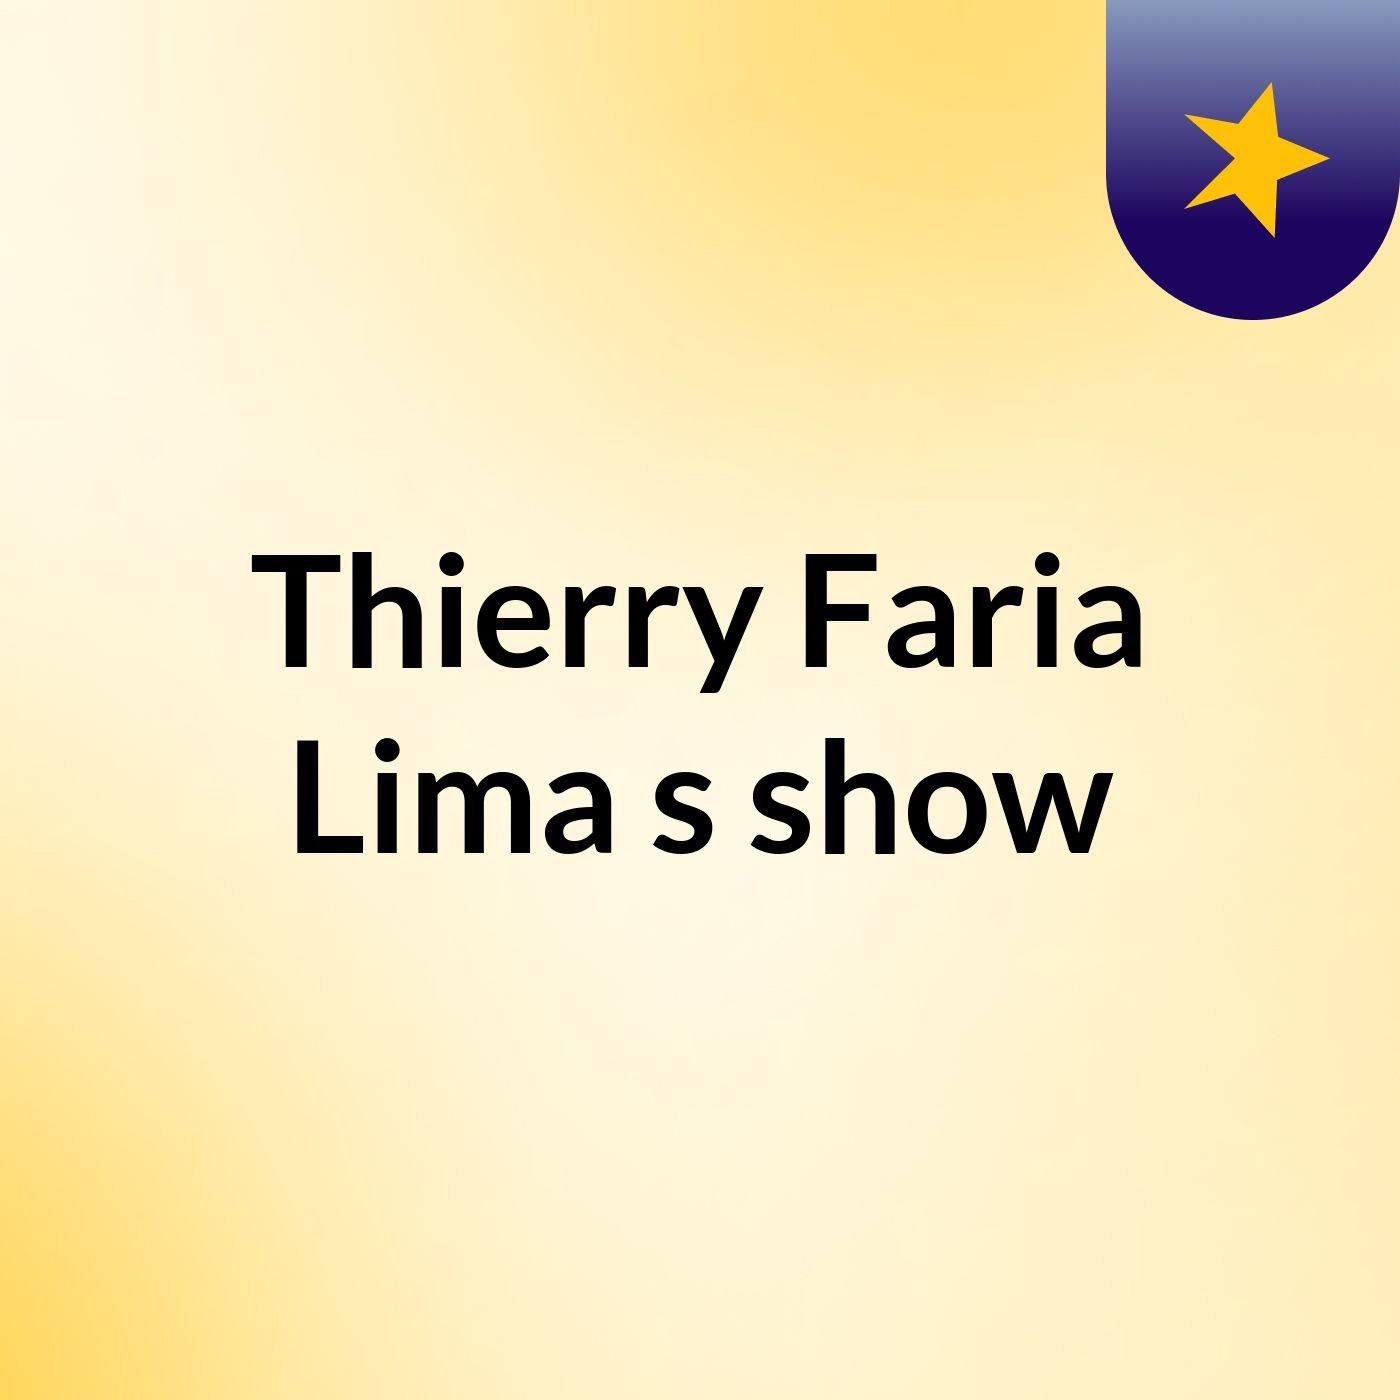 Thierry Faria Lima's show